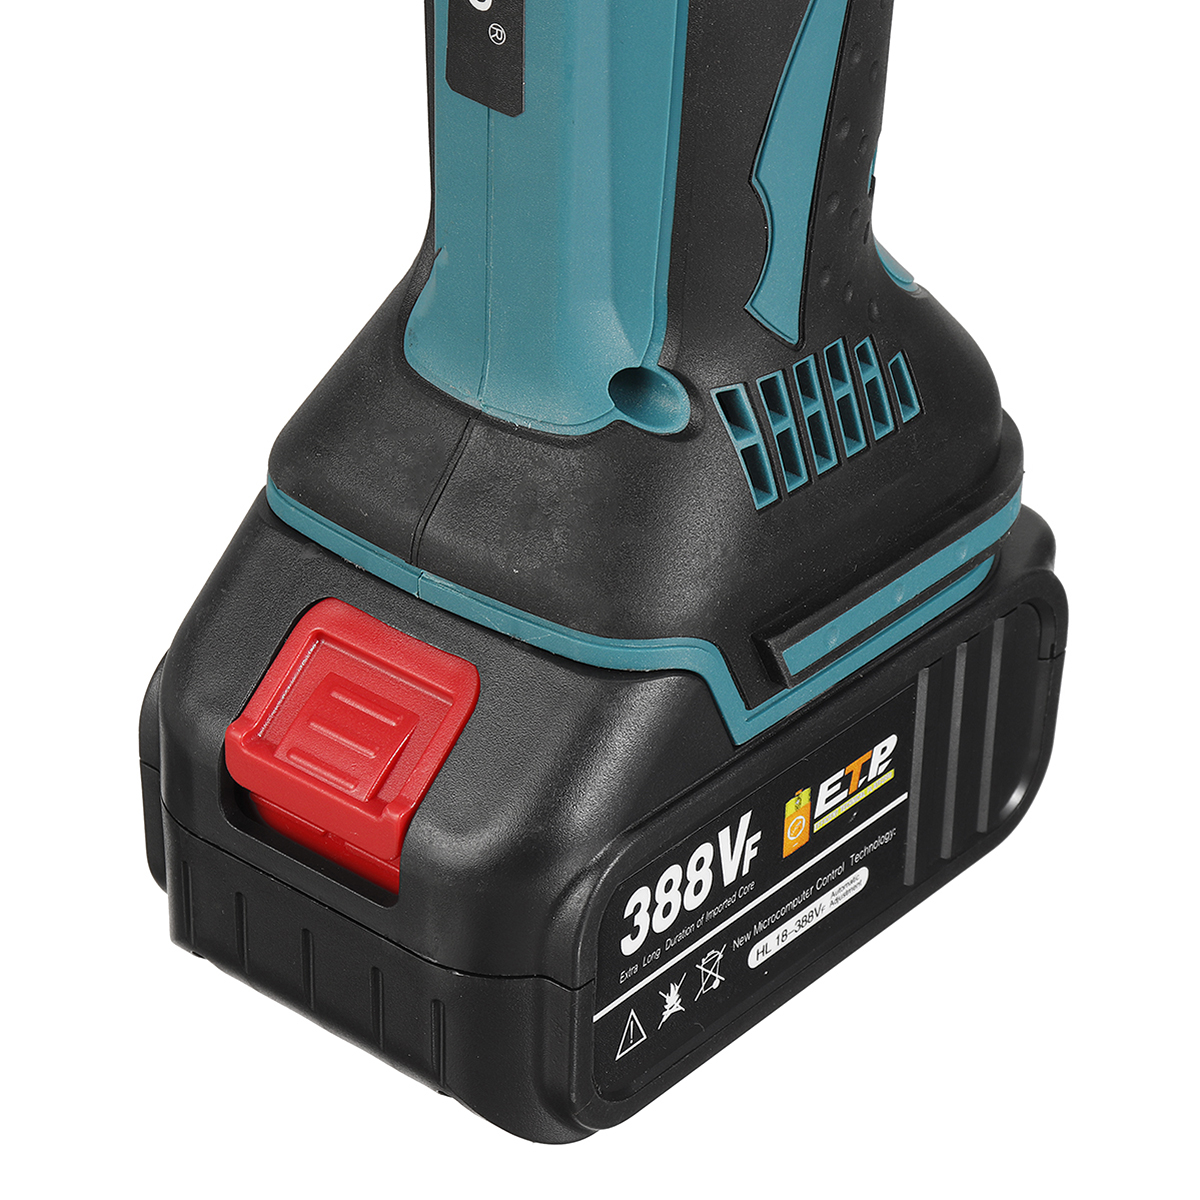 Drillpro-388VF-125mm-BlueBalck-Brushless-Motor-8500rpm-800W-Compact-Lithium-Electric-Polisher-1962696-12